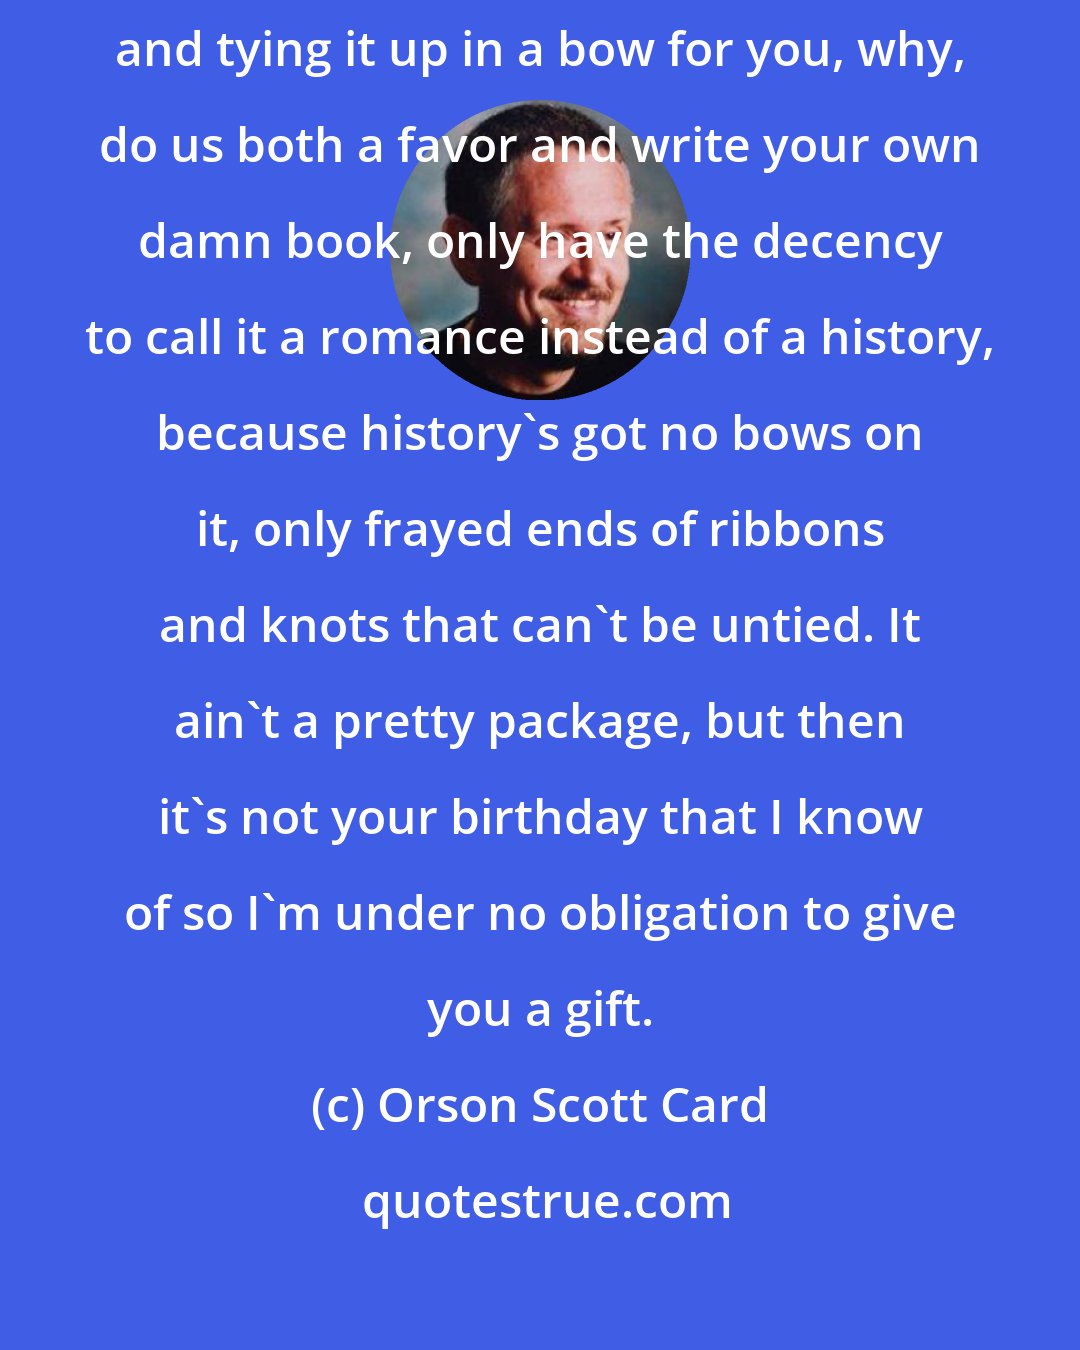 Orson Scott Card: And if you're going to criticize me for not finishing the whole thing and tying it up in a bow for you, why, do us both a favor and write your own damn book, only have the decency to call it a romance instead of a history, because history's got no bows on it, only frayed ends of ribbons and knots that can't be untied. It ain't a pretty package, but then it's not your birthday that I know of so I'm under no obligation to give you a gift.